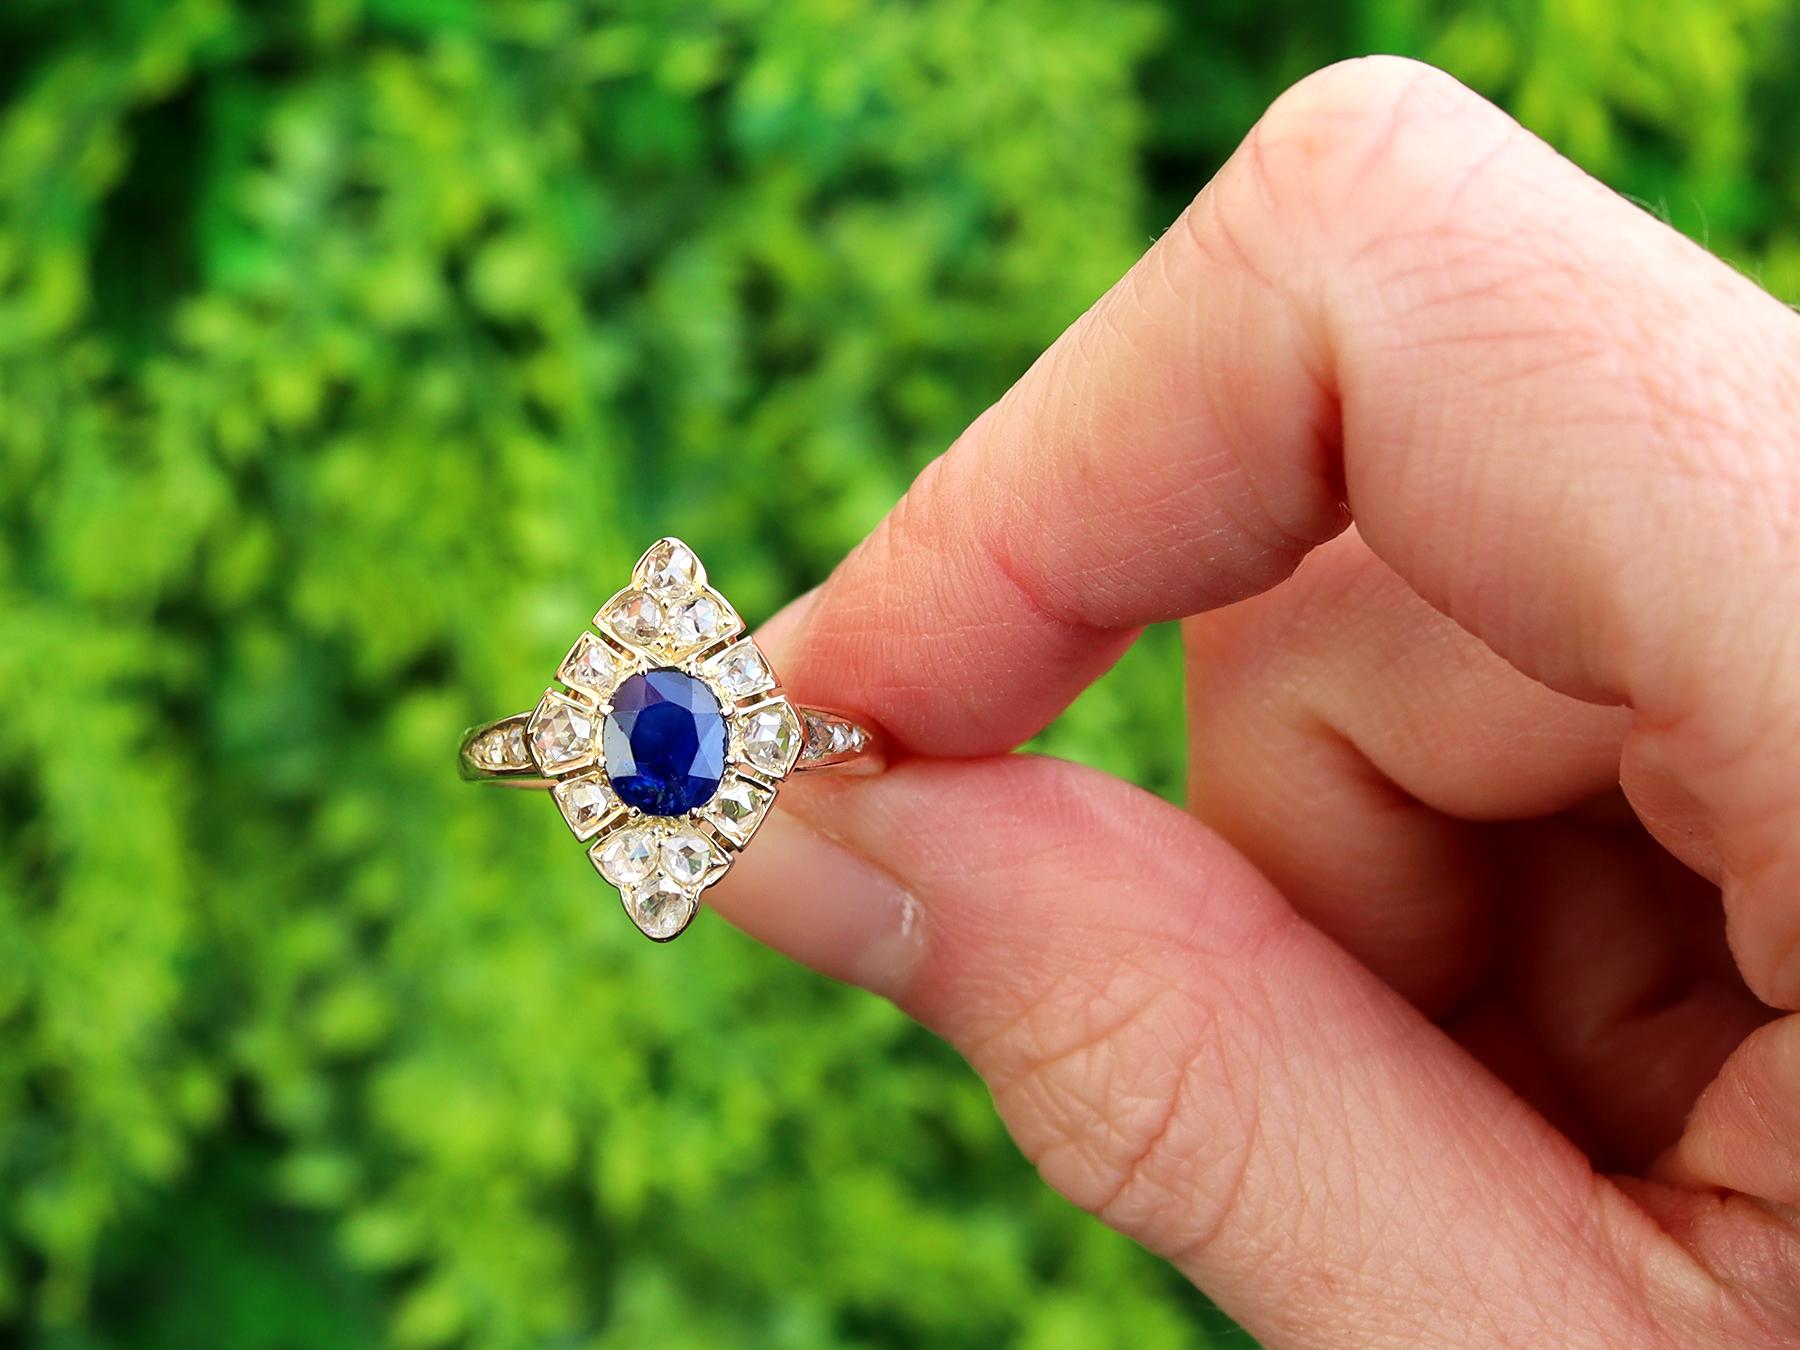 A fine and impressive antique Austro-Hungarian 0.85 carat Basaltic sapphire and 0.62 carat diamond, 14 karat yellow gold marquise ring; part of our antique sapphire jewellery collection.

This fine and impressive antique Austro-Hungarian sapphire